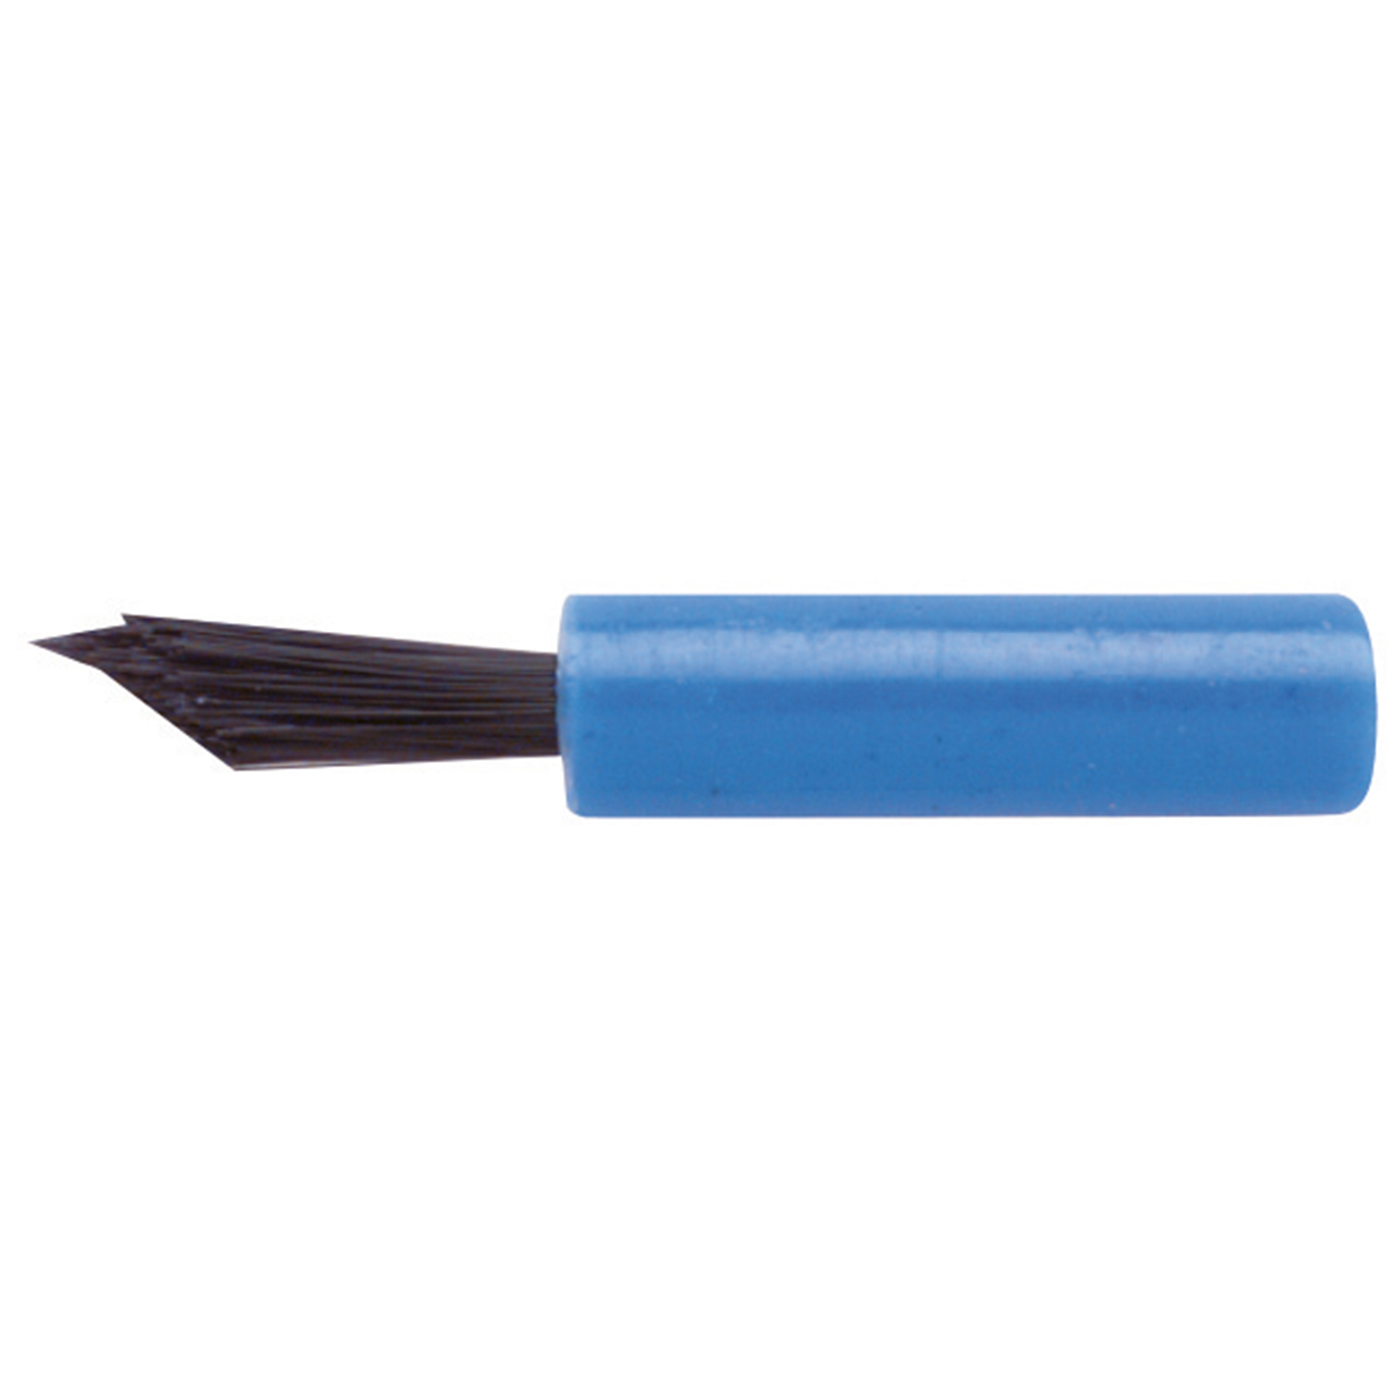 FINOPAINT Brush Tips, Pointed, Blue - 50 pieces